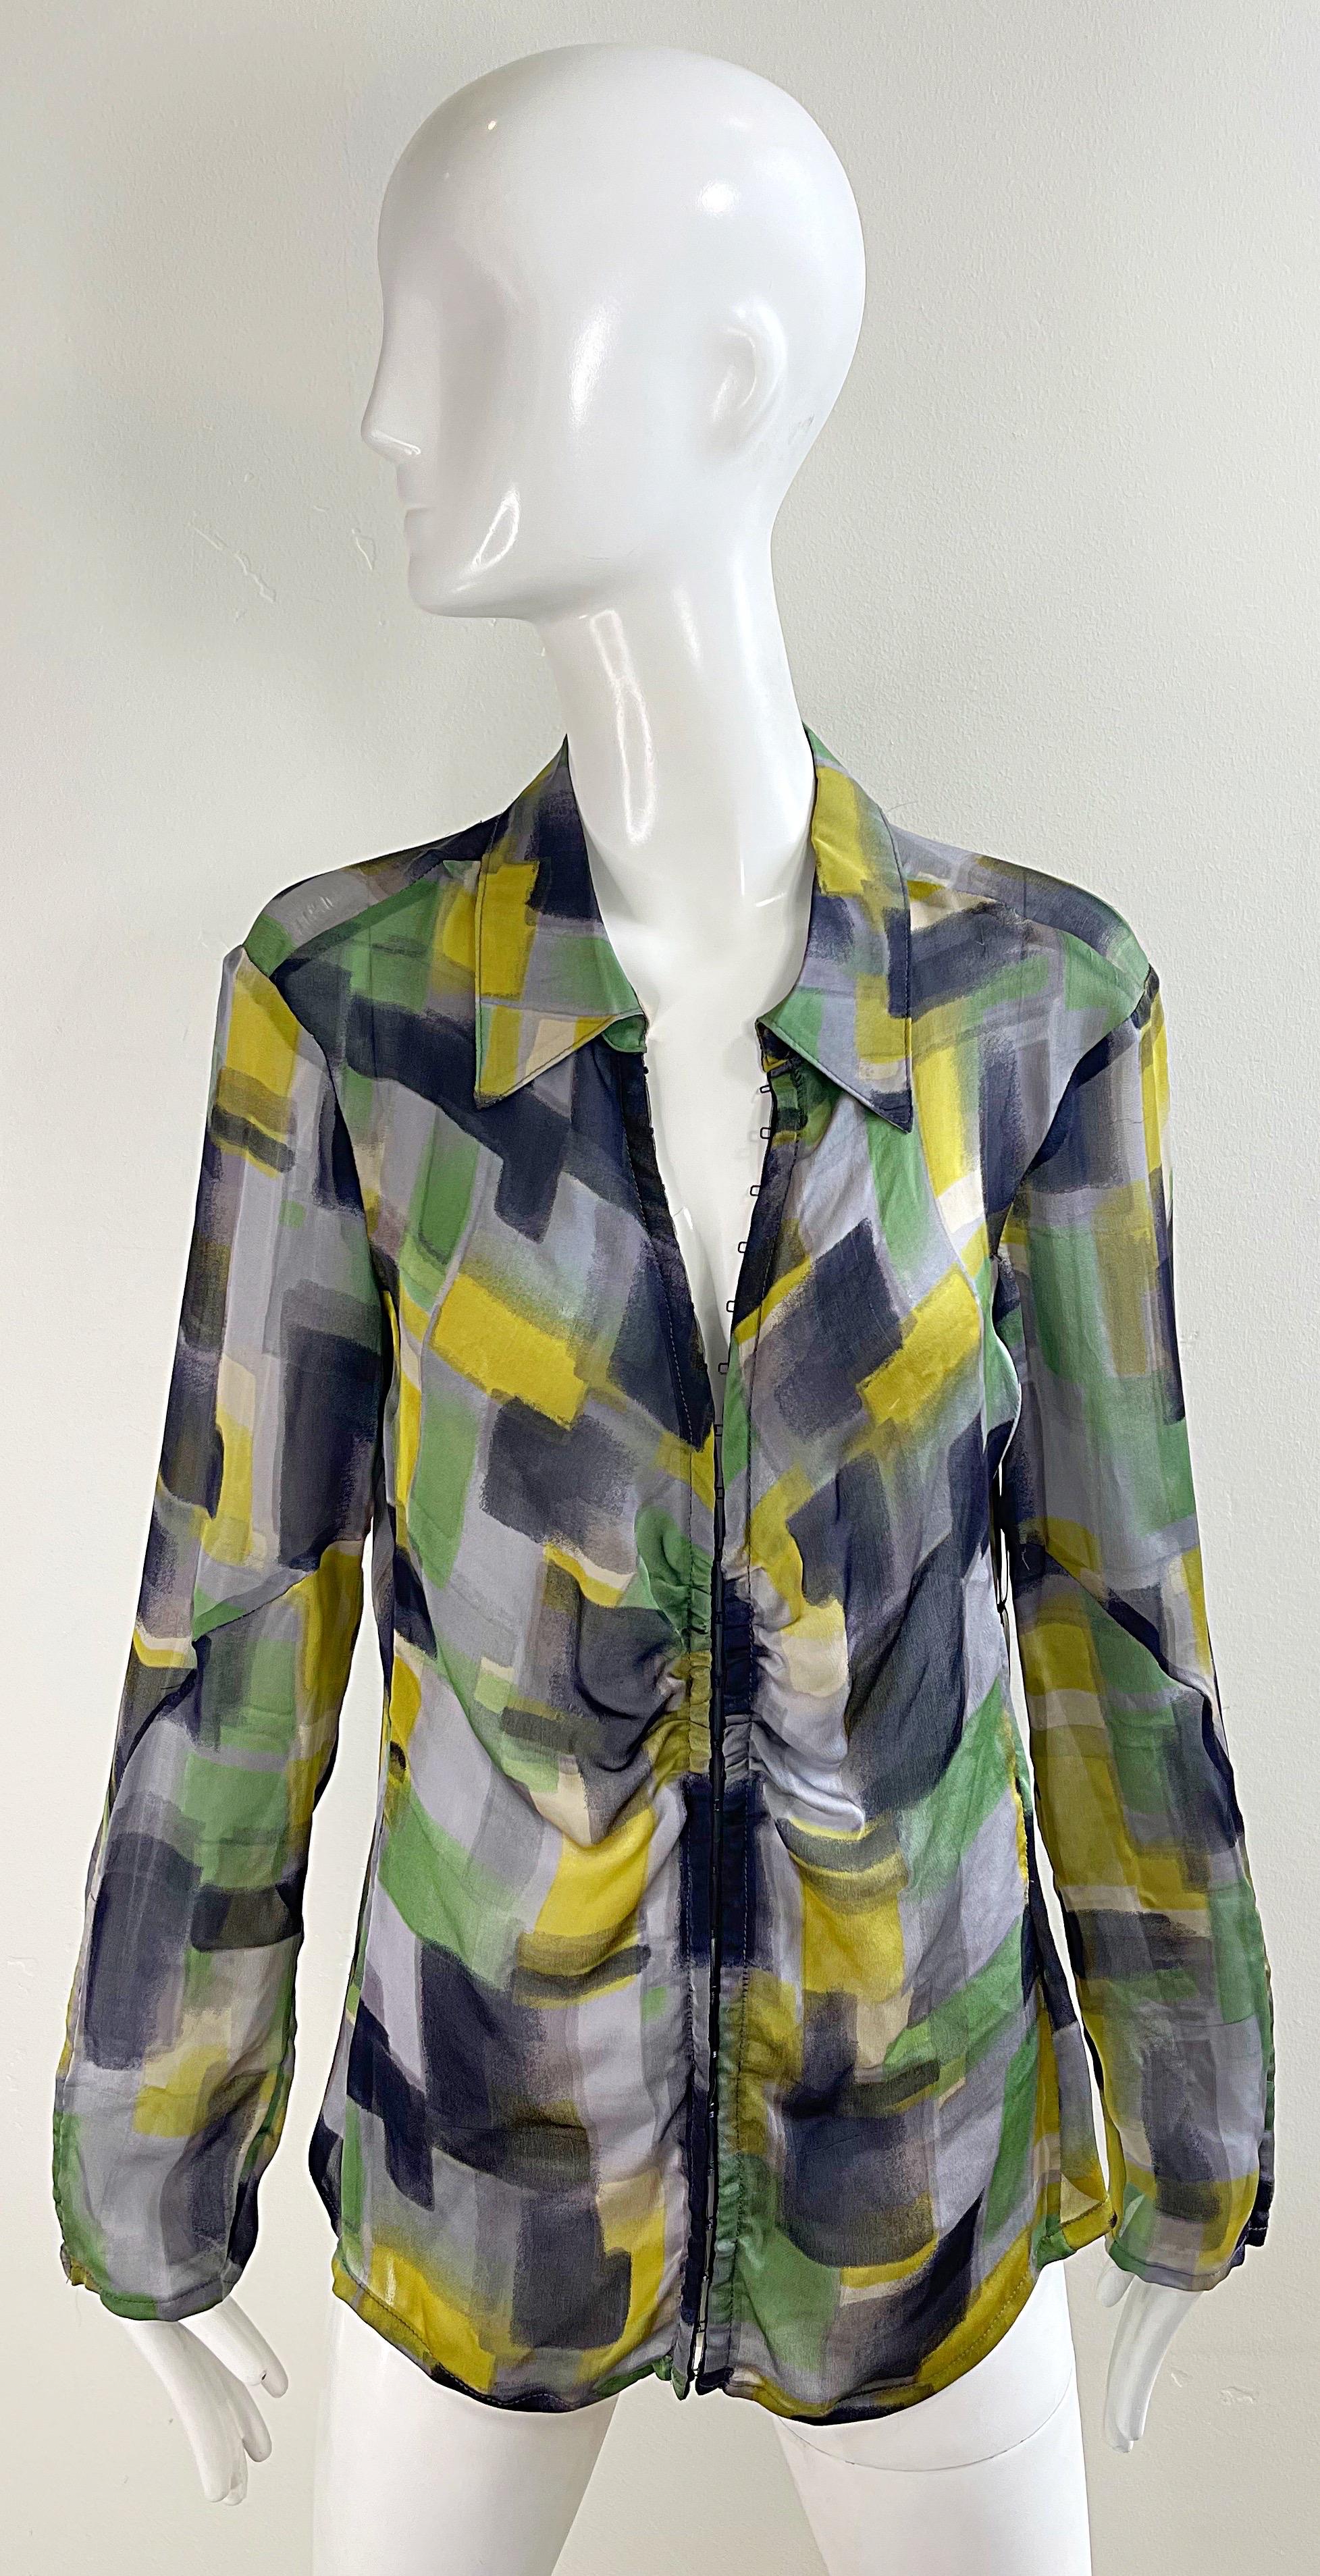 Women's NWT Zenobia Saks 5th Avenue Size 12 Sheer Silk Chiffon Abstract Print Blouse Top For Sale